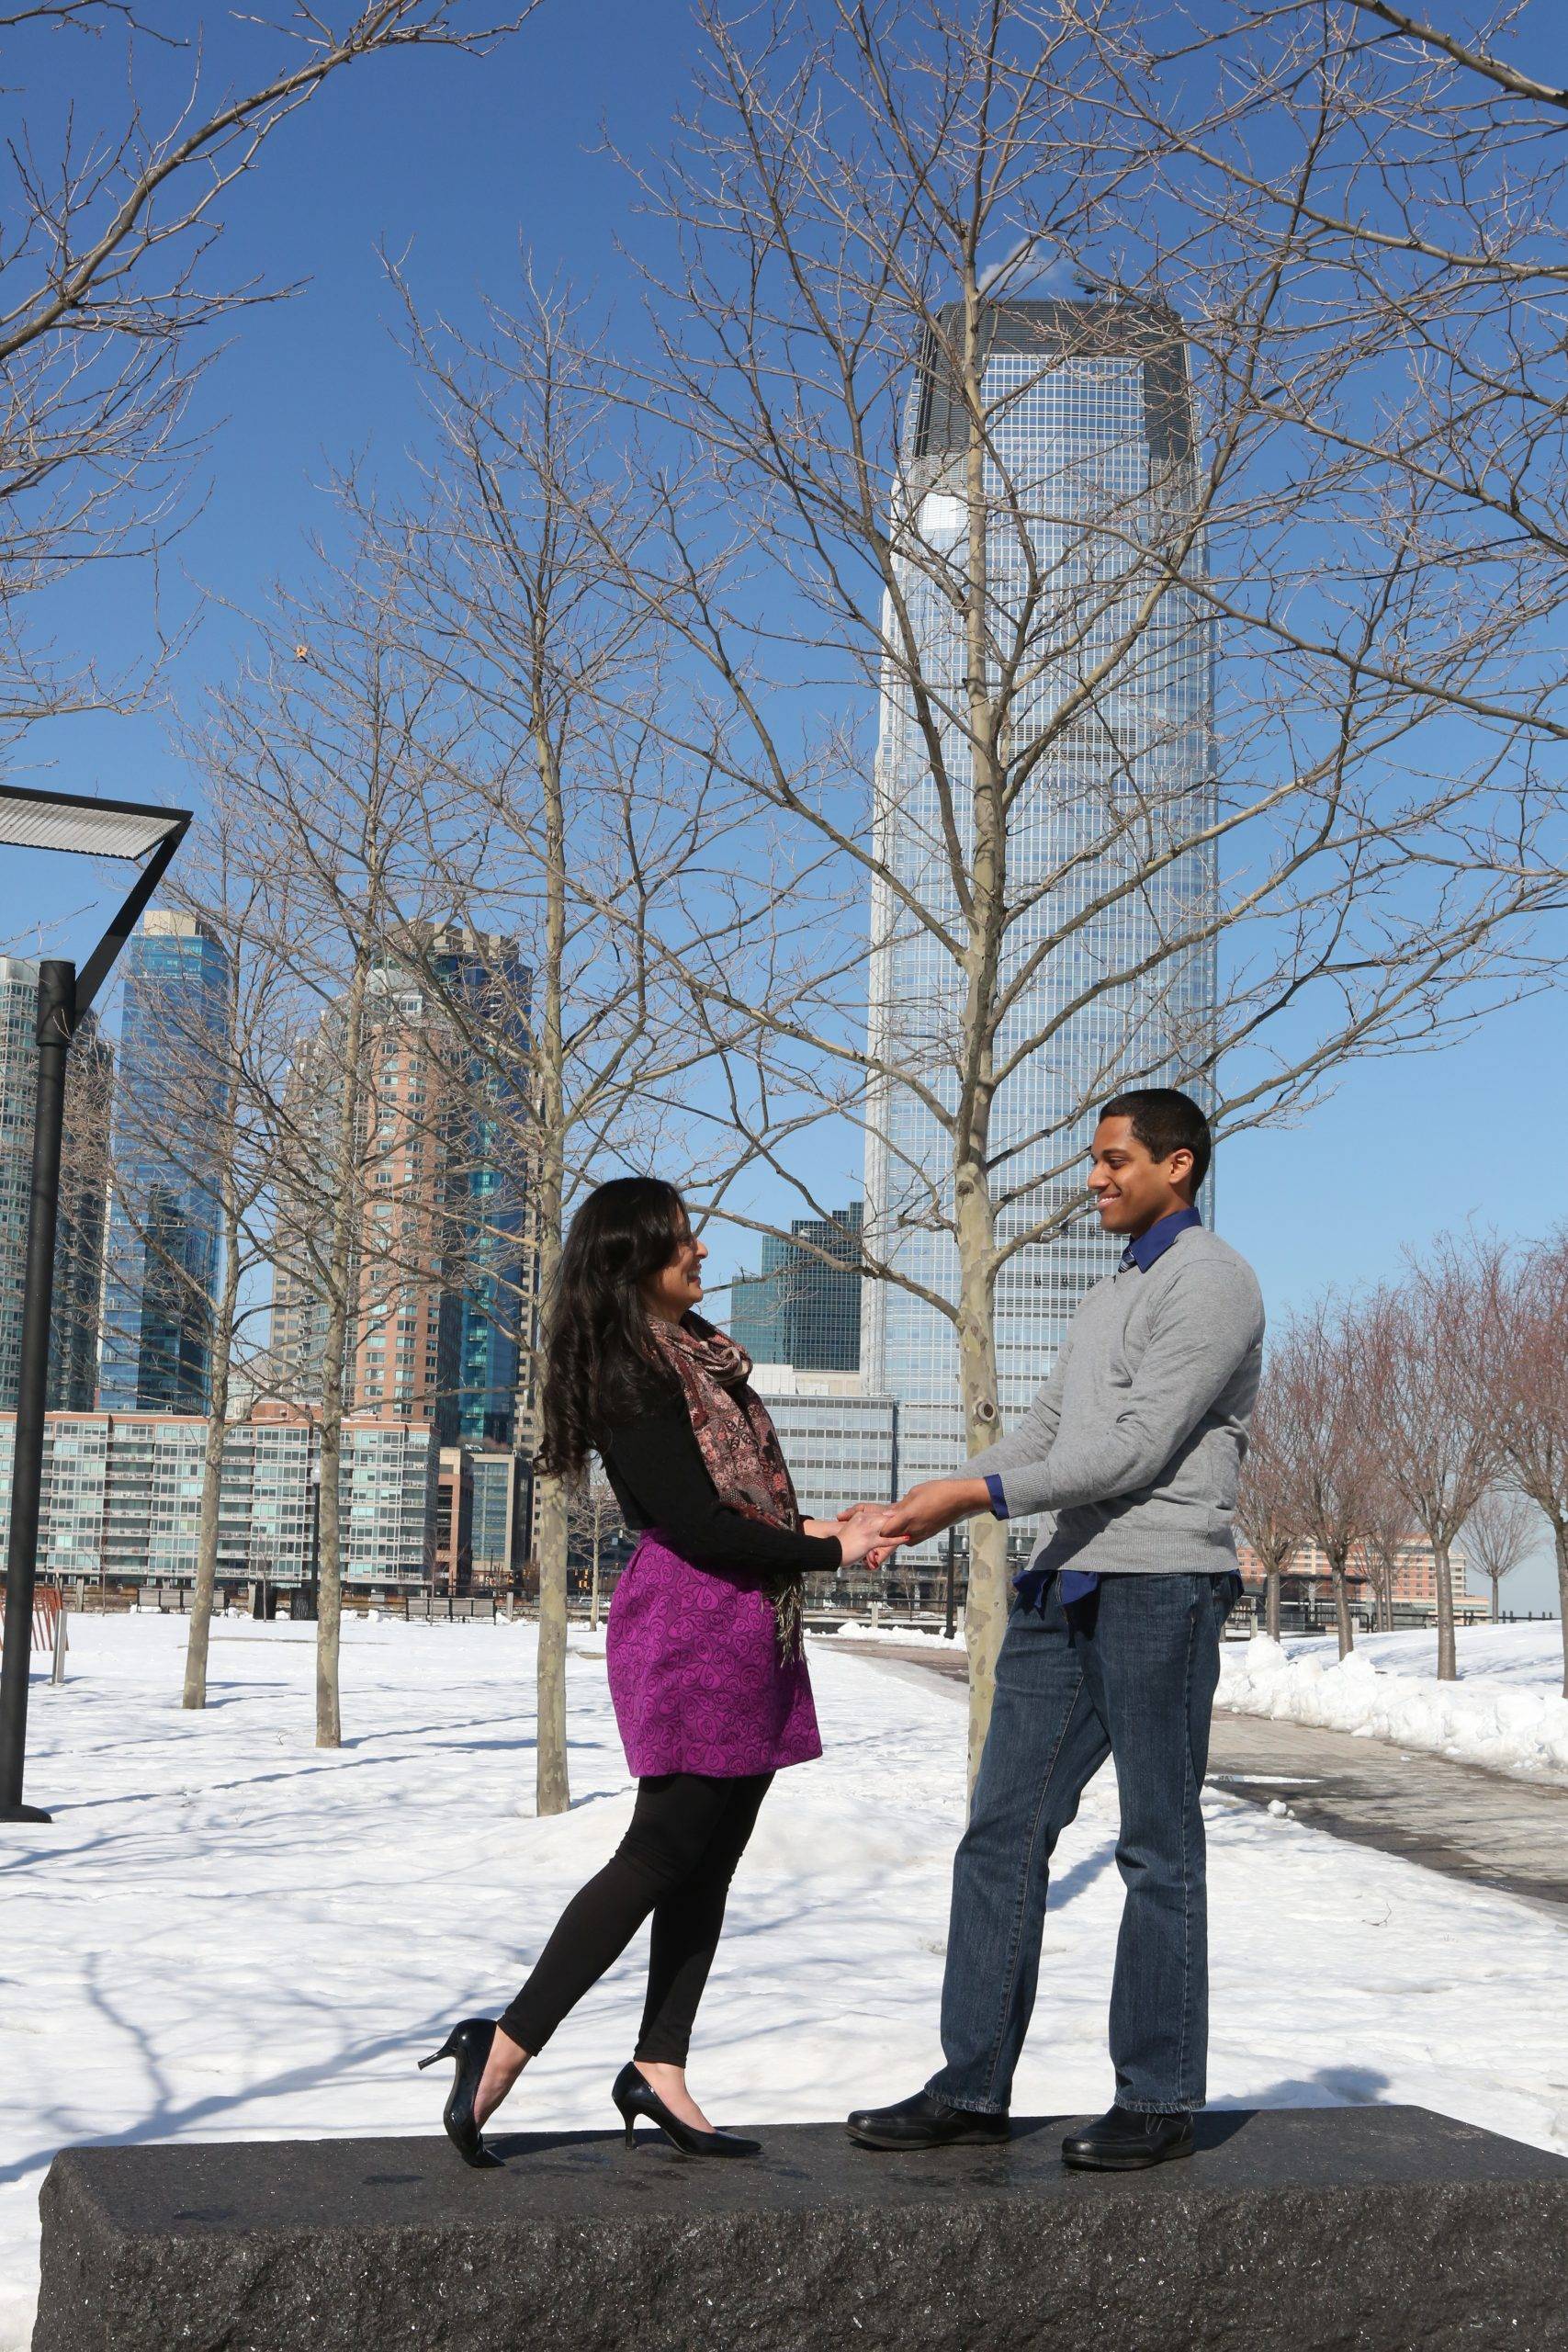 A man and woman standing in the snow in front of a skyscraper.